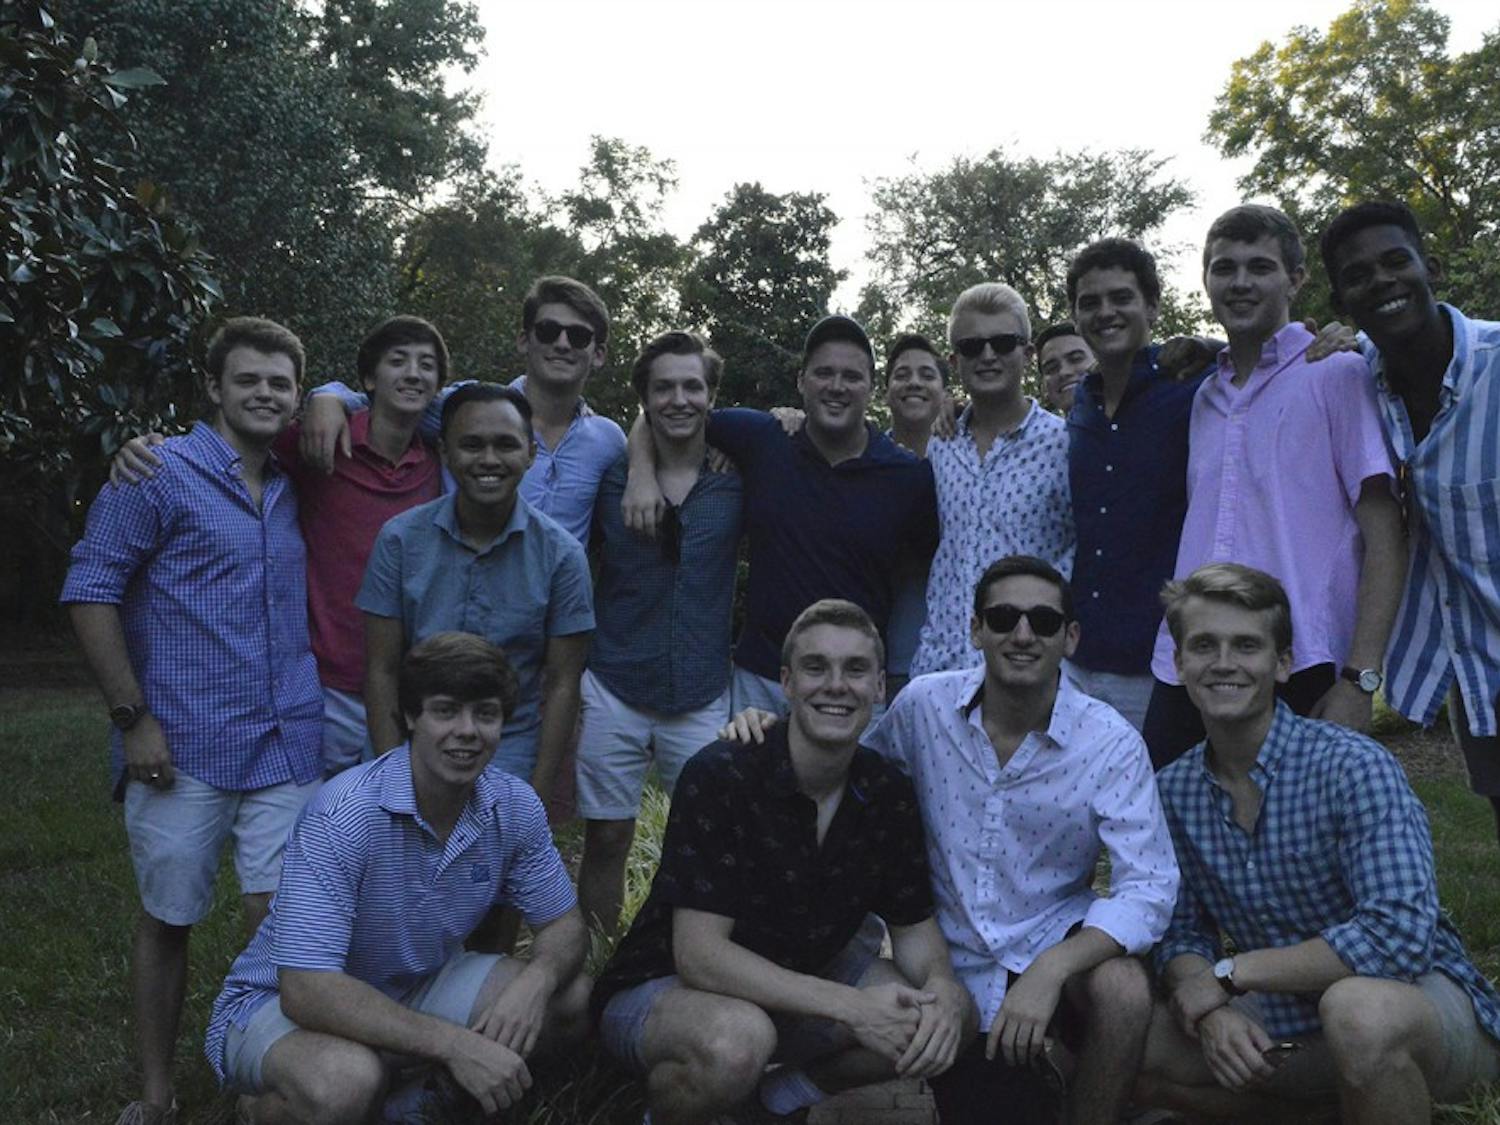 UNC's Clef Hangers hid behind the Tri Delta house, waiting for their moment to sing to the girls during their celebration.